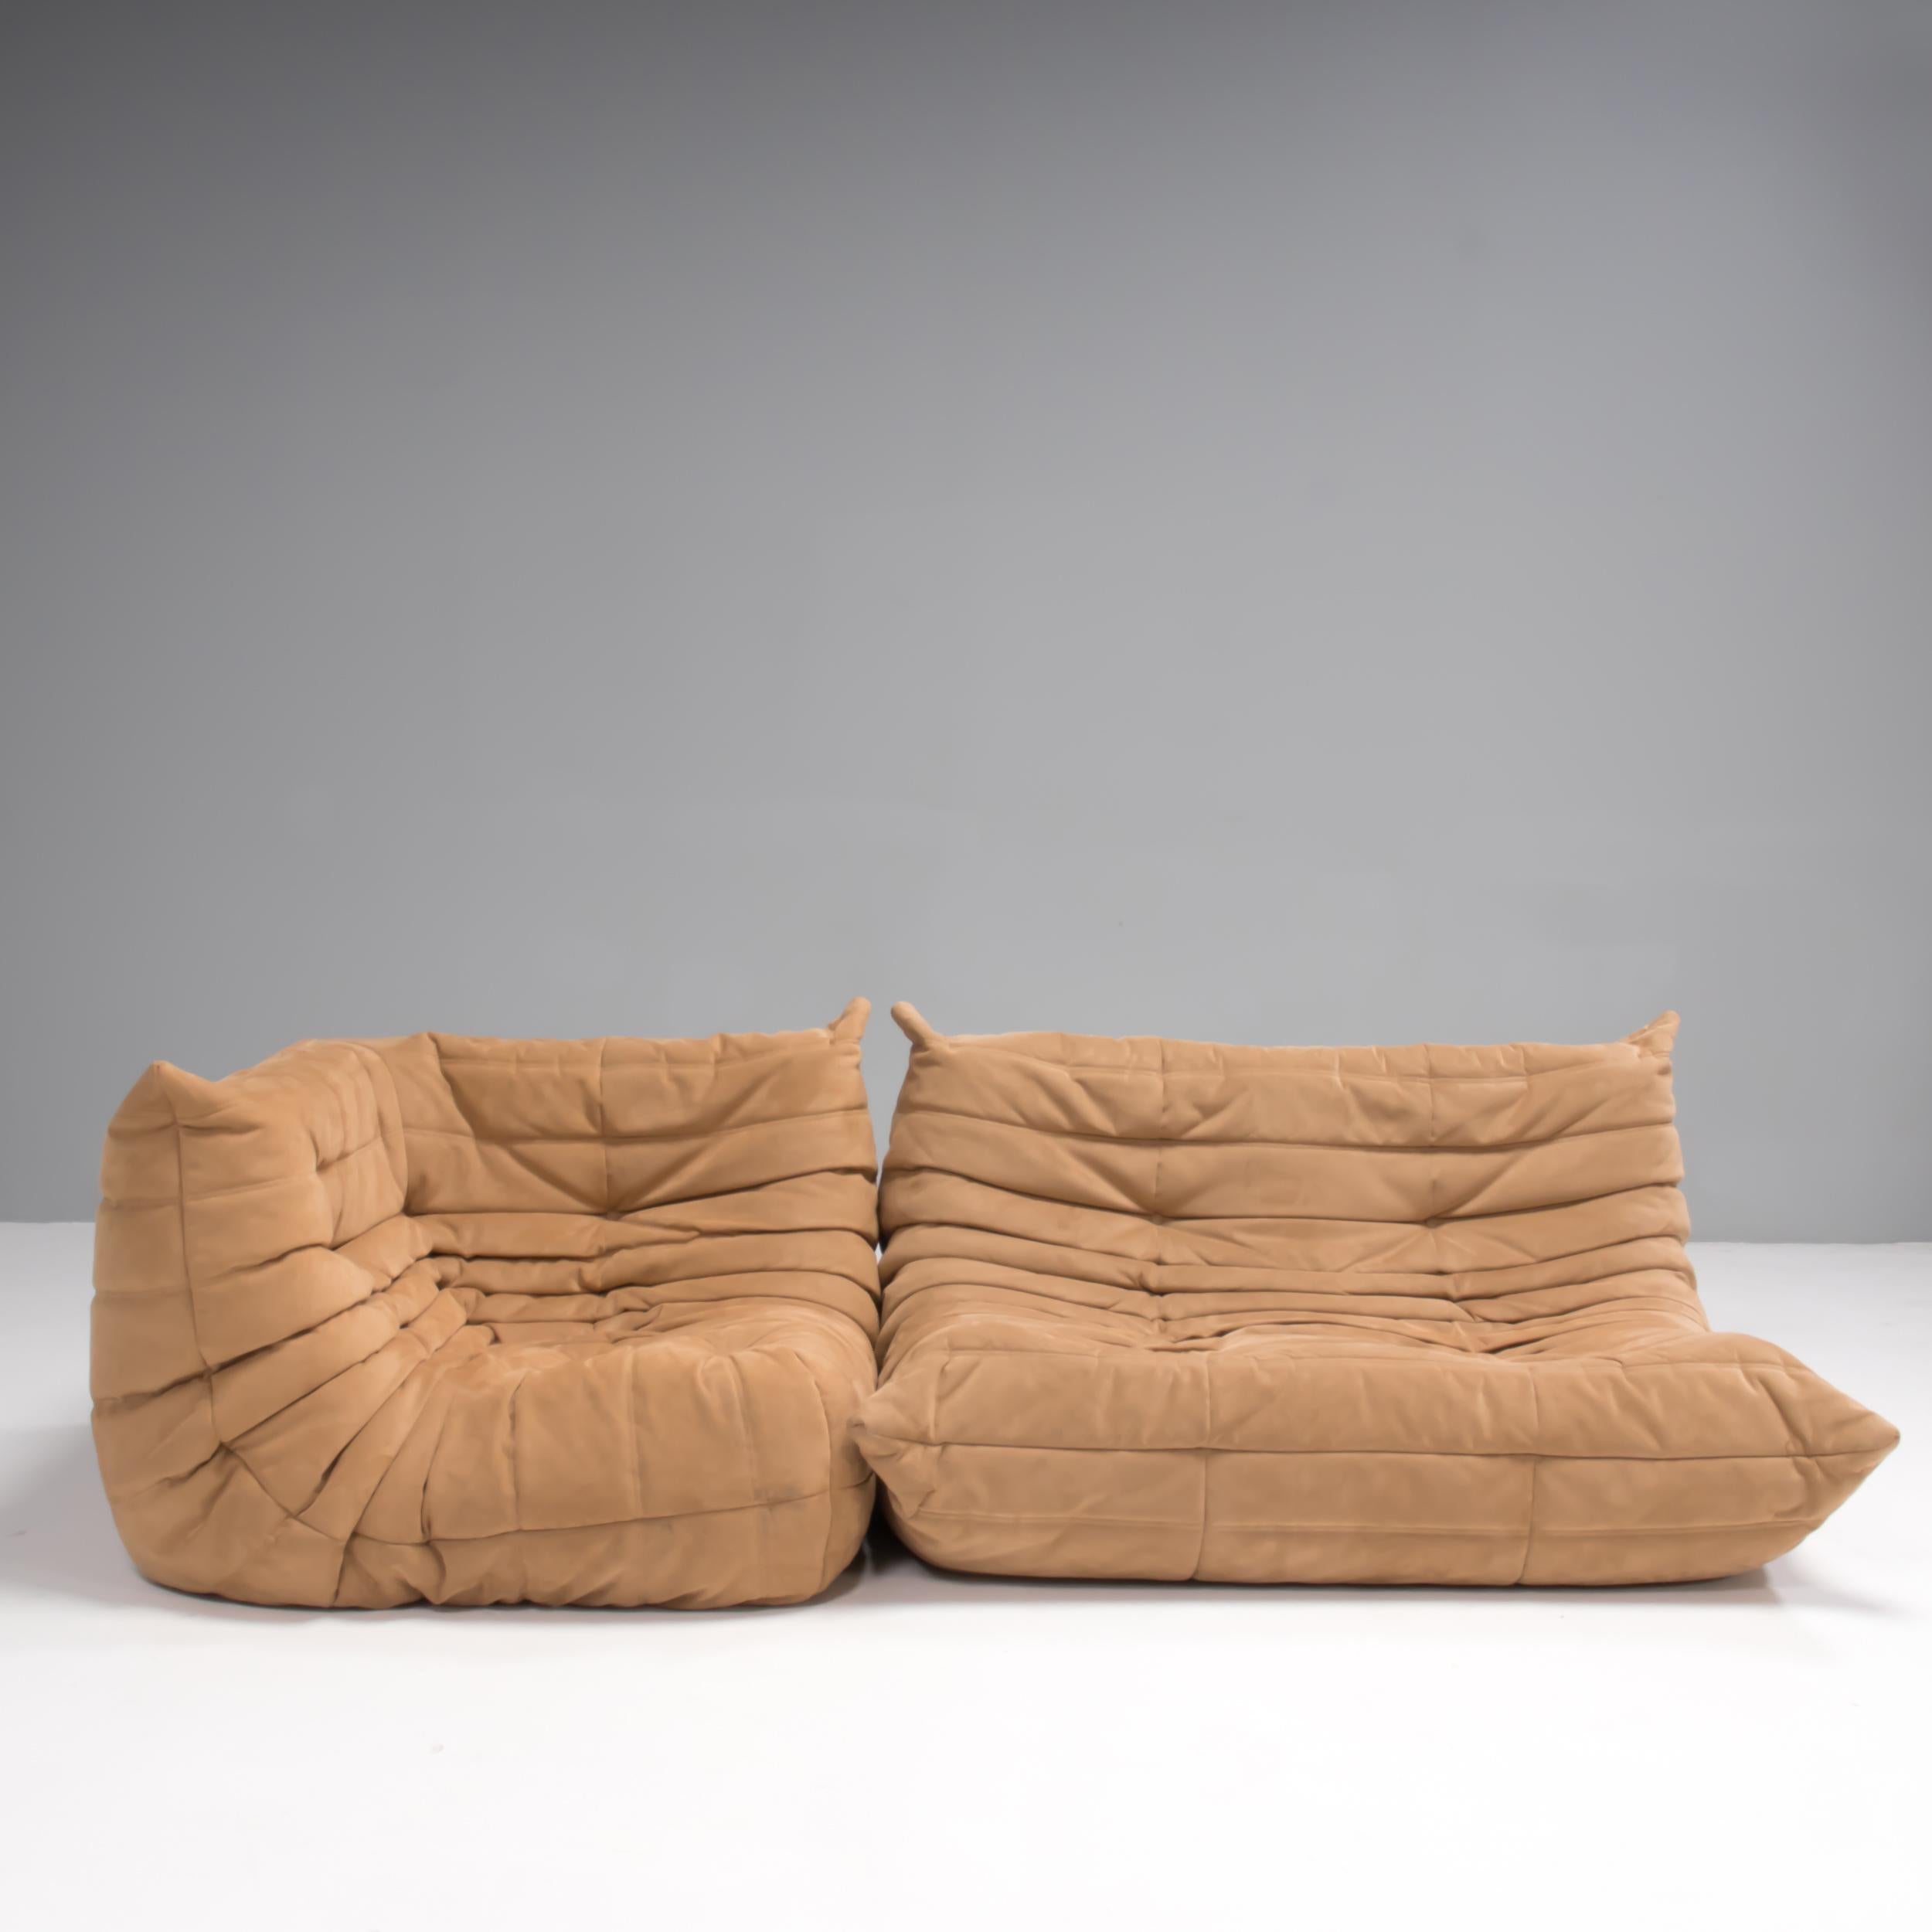 The iconic Togo sofa, originally designed by Michel Ducaroy for Ligne Roset in 1973, has become a design classic. 

This 2-seater and corner sofa has been upholstered in extra soft light brown leather suede and features the instantly recognisable